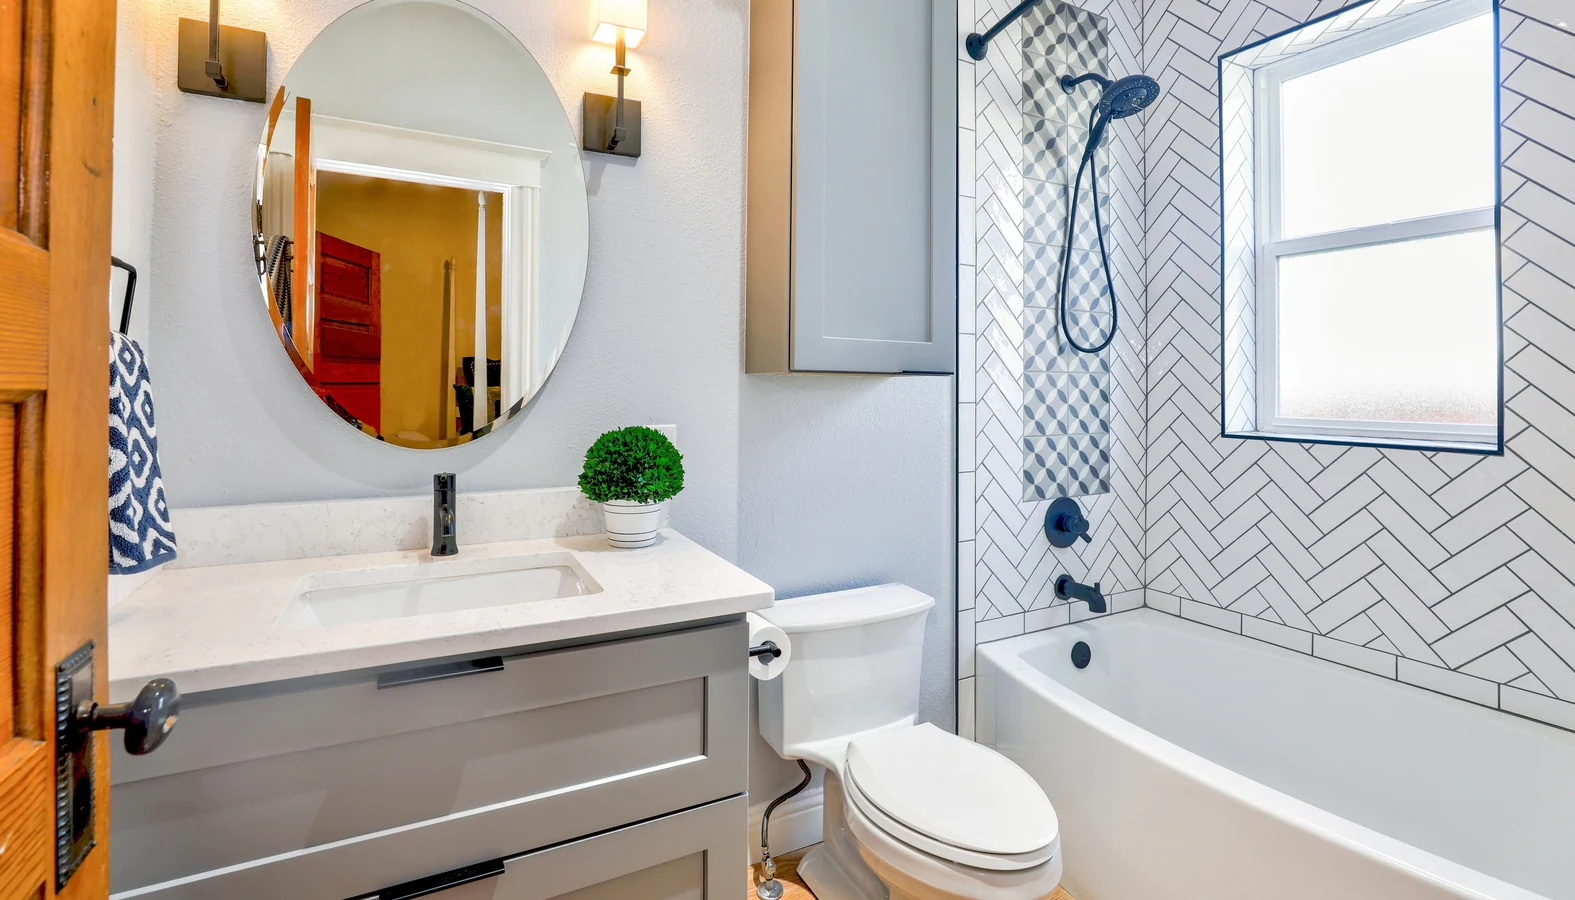 Interior decor tips on elevating the bathroom from a service facility to a luxurious space